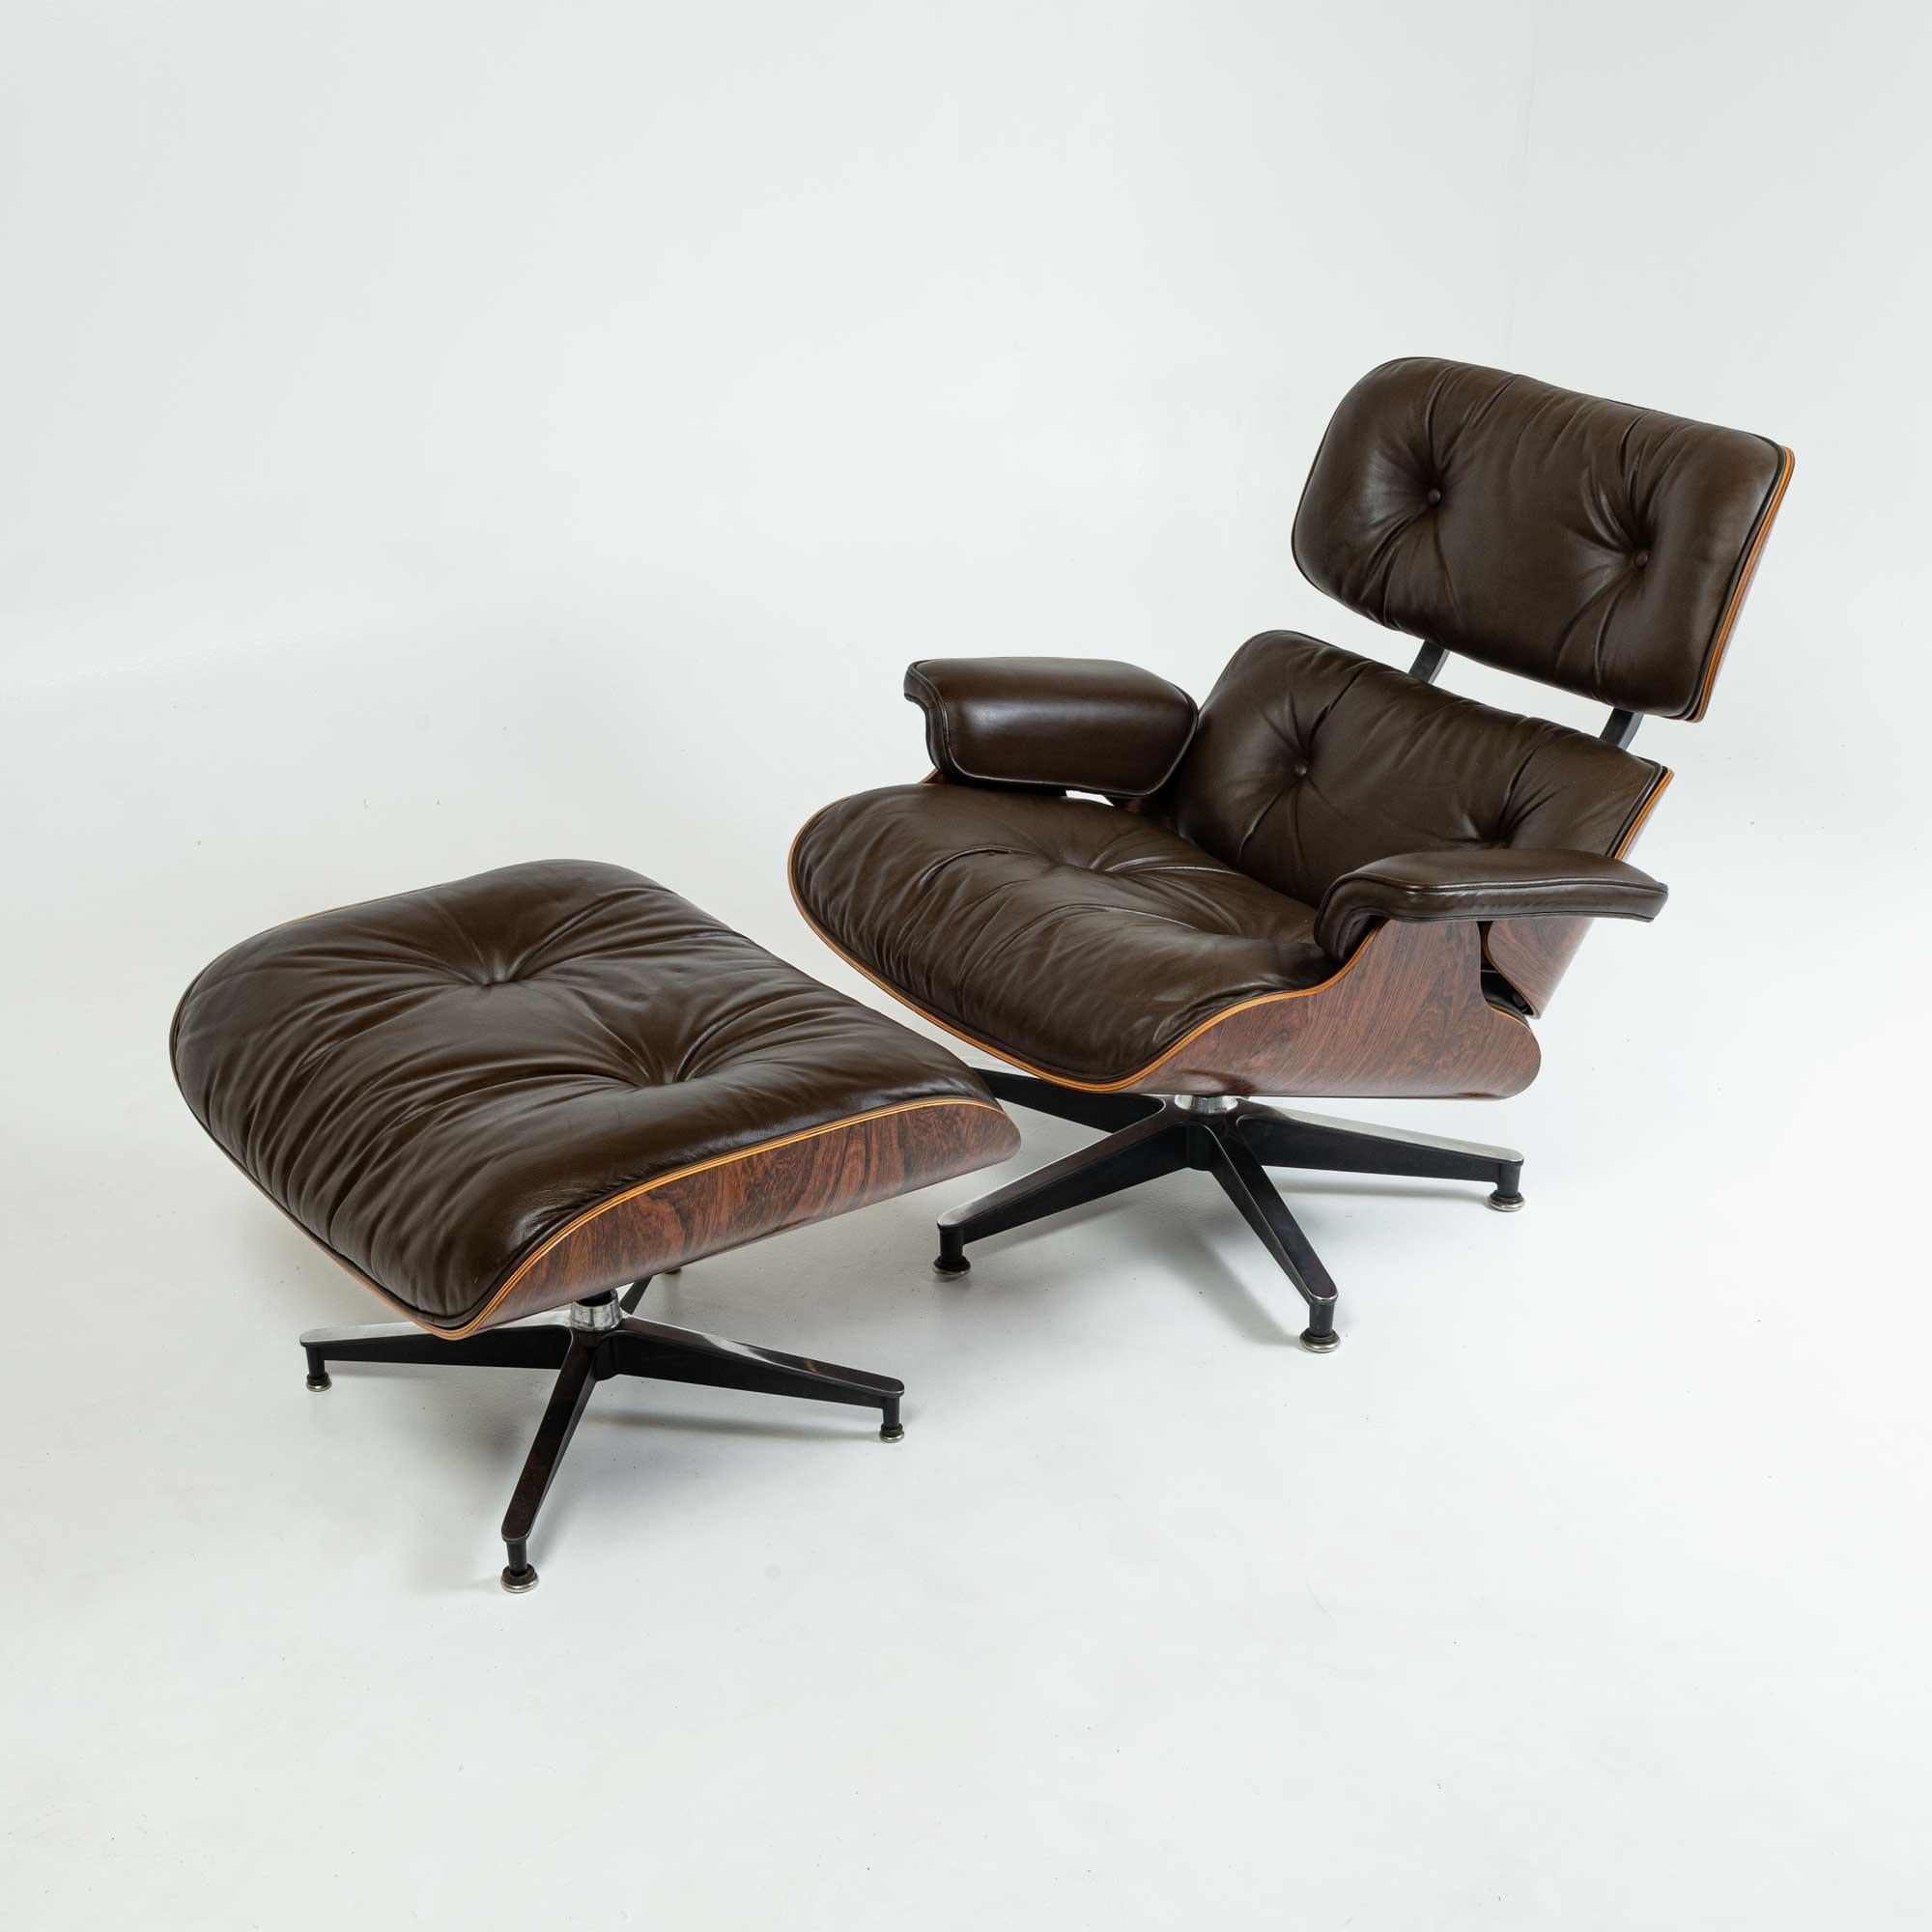 Mid-Century Modern 3rd Gen Eames Lounge Chair 670-671 in Original Chocolate Leather For Sale